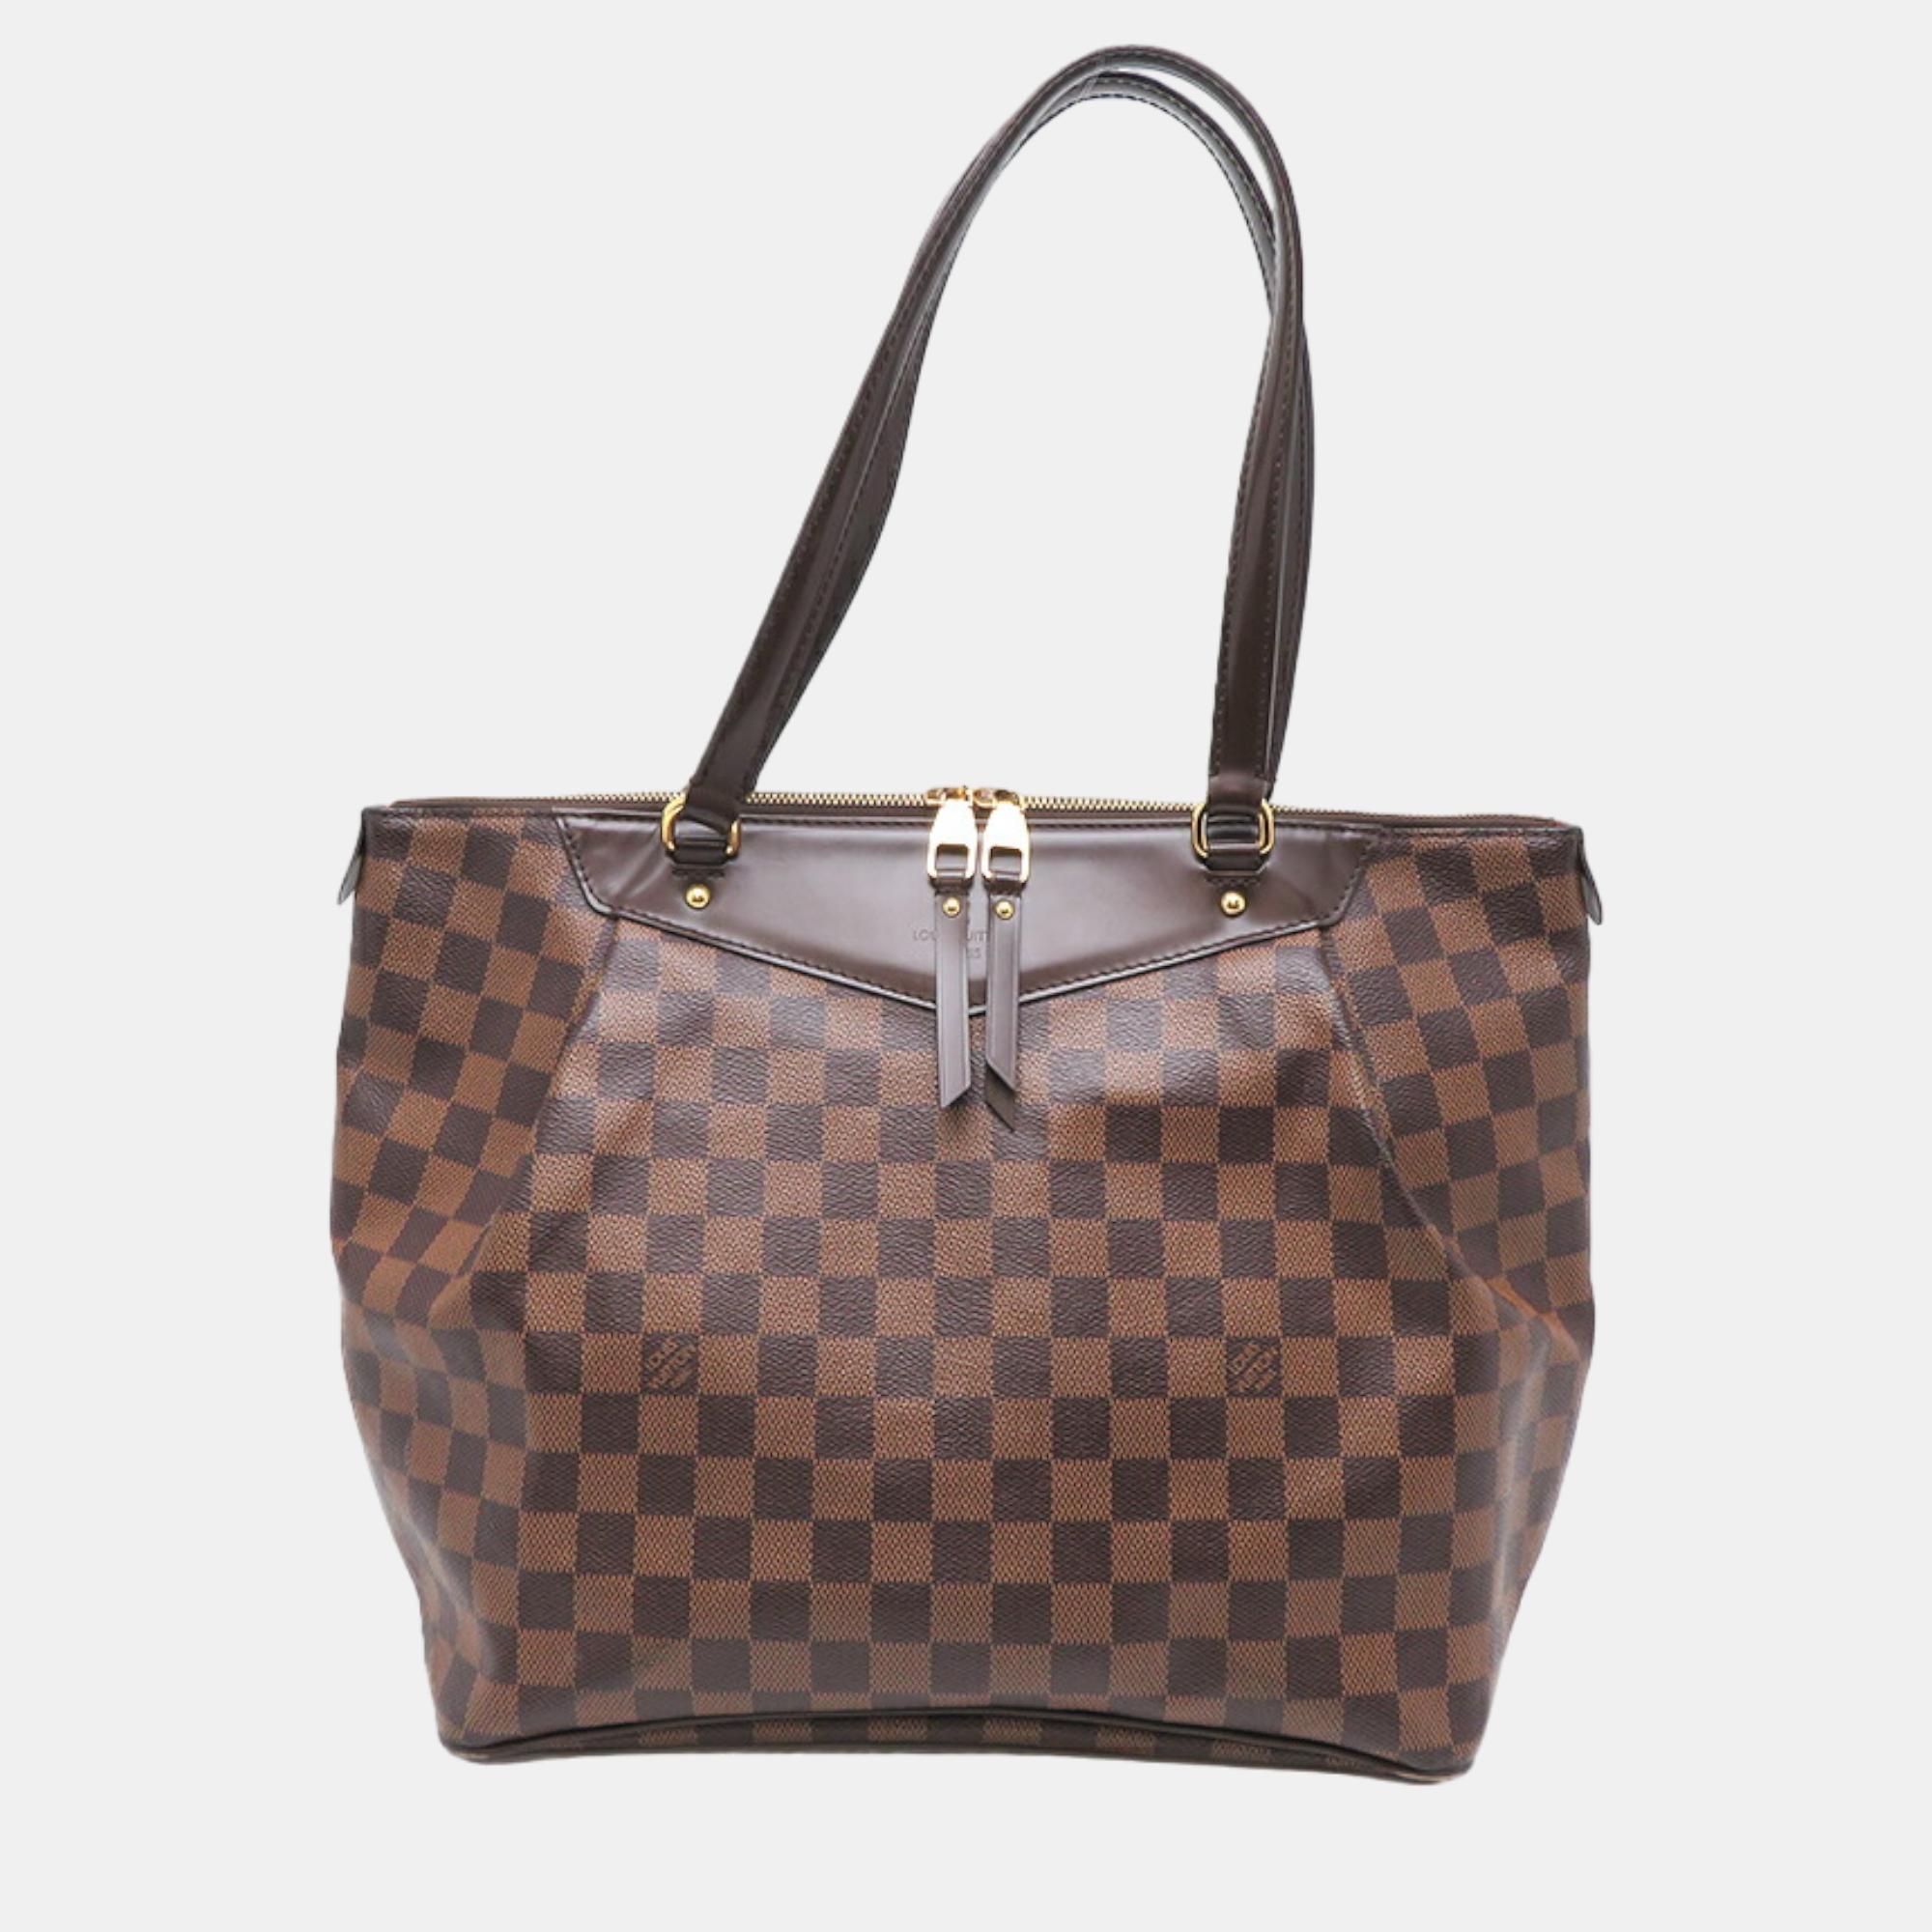 Pre-owned Louis Vuitton Brown Damier Ebene Canvas Westminster Gm Tote Bag